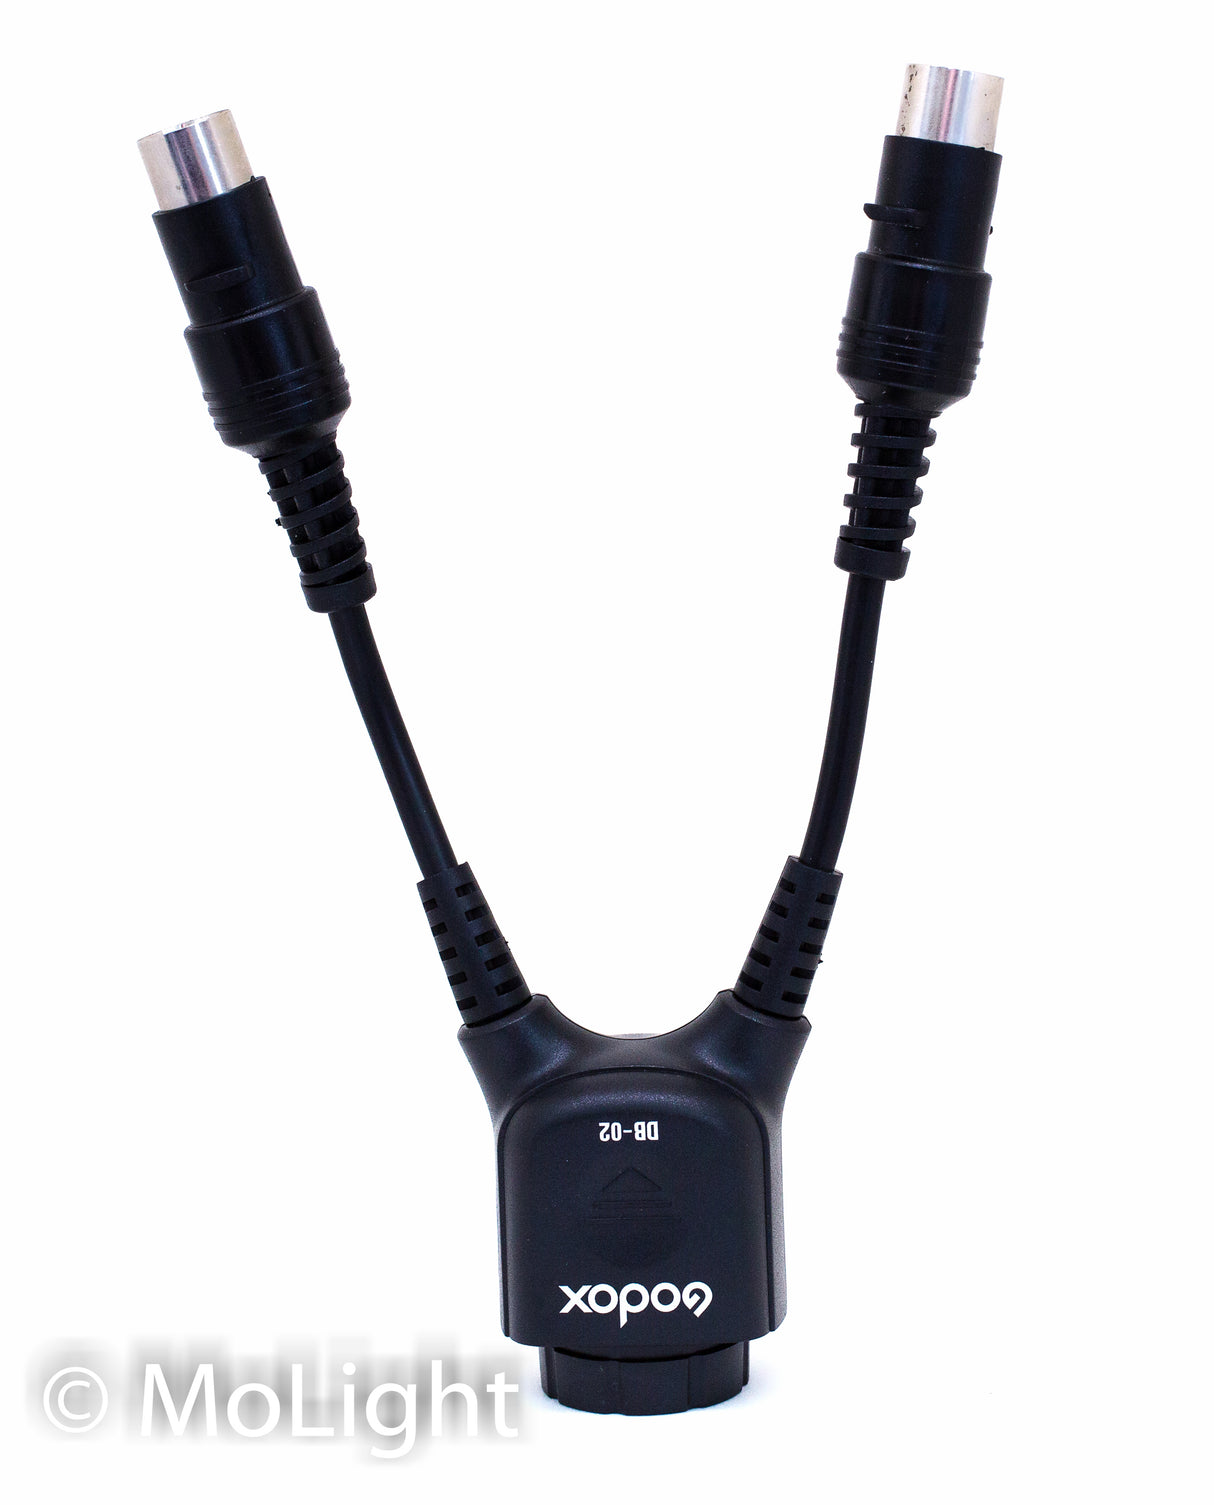 Y Adapter for PB960 Power Pack